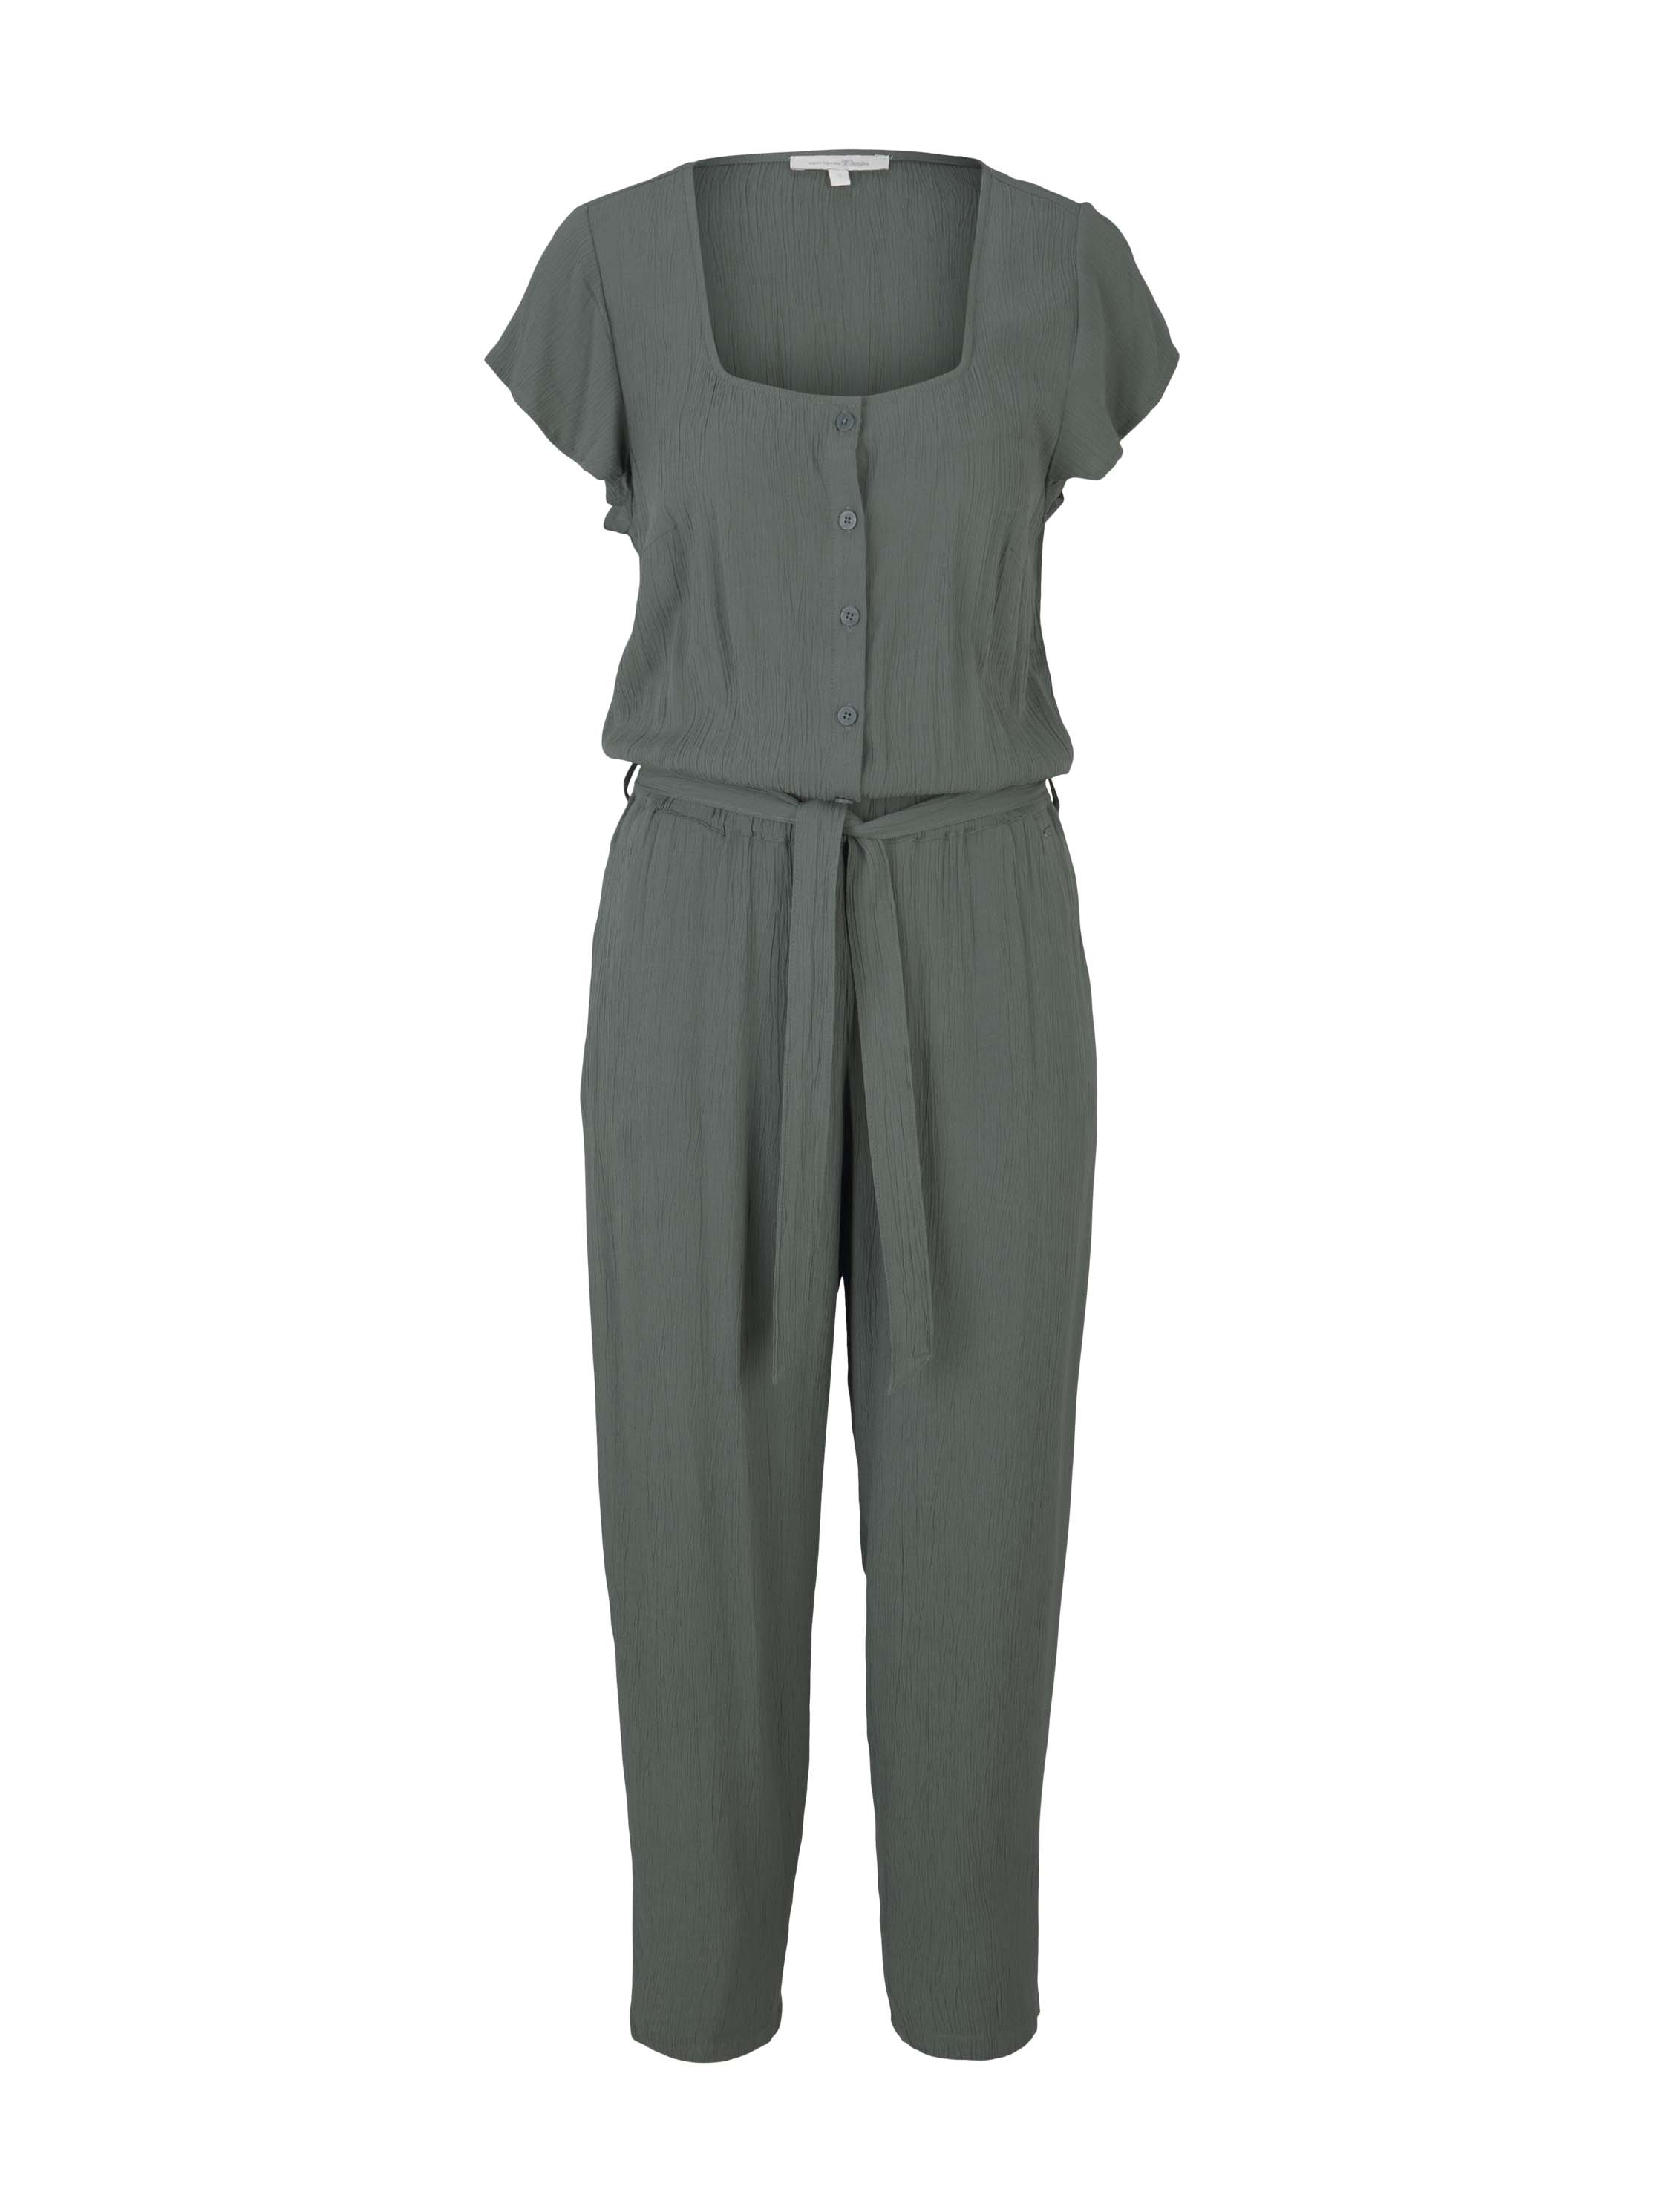 Crincled Jumpsuit, dusty pine green